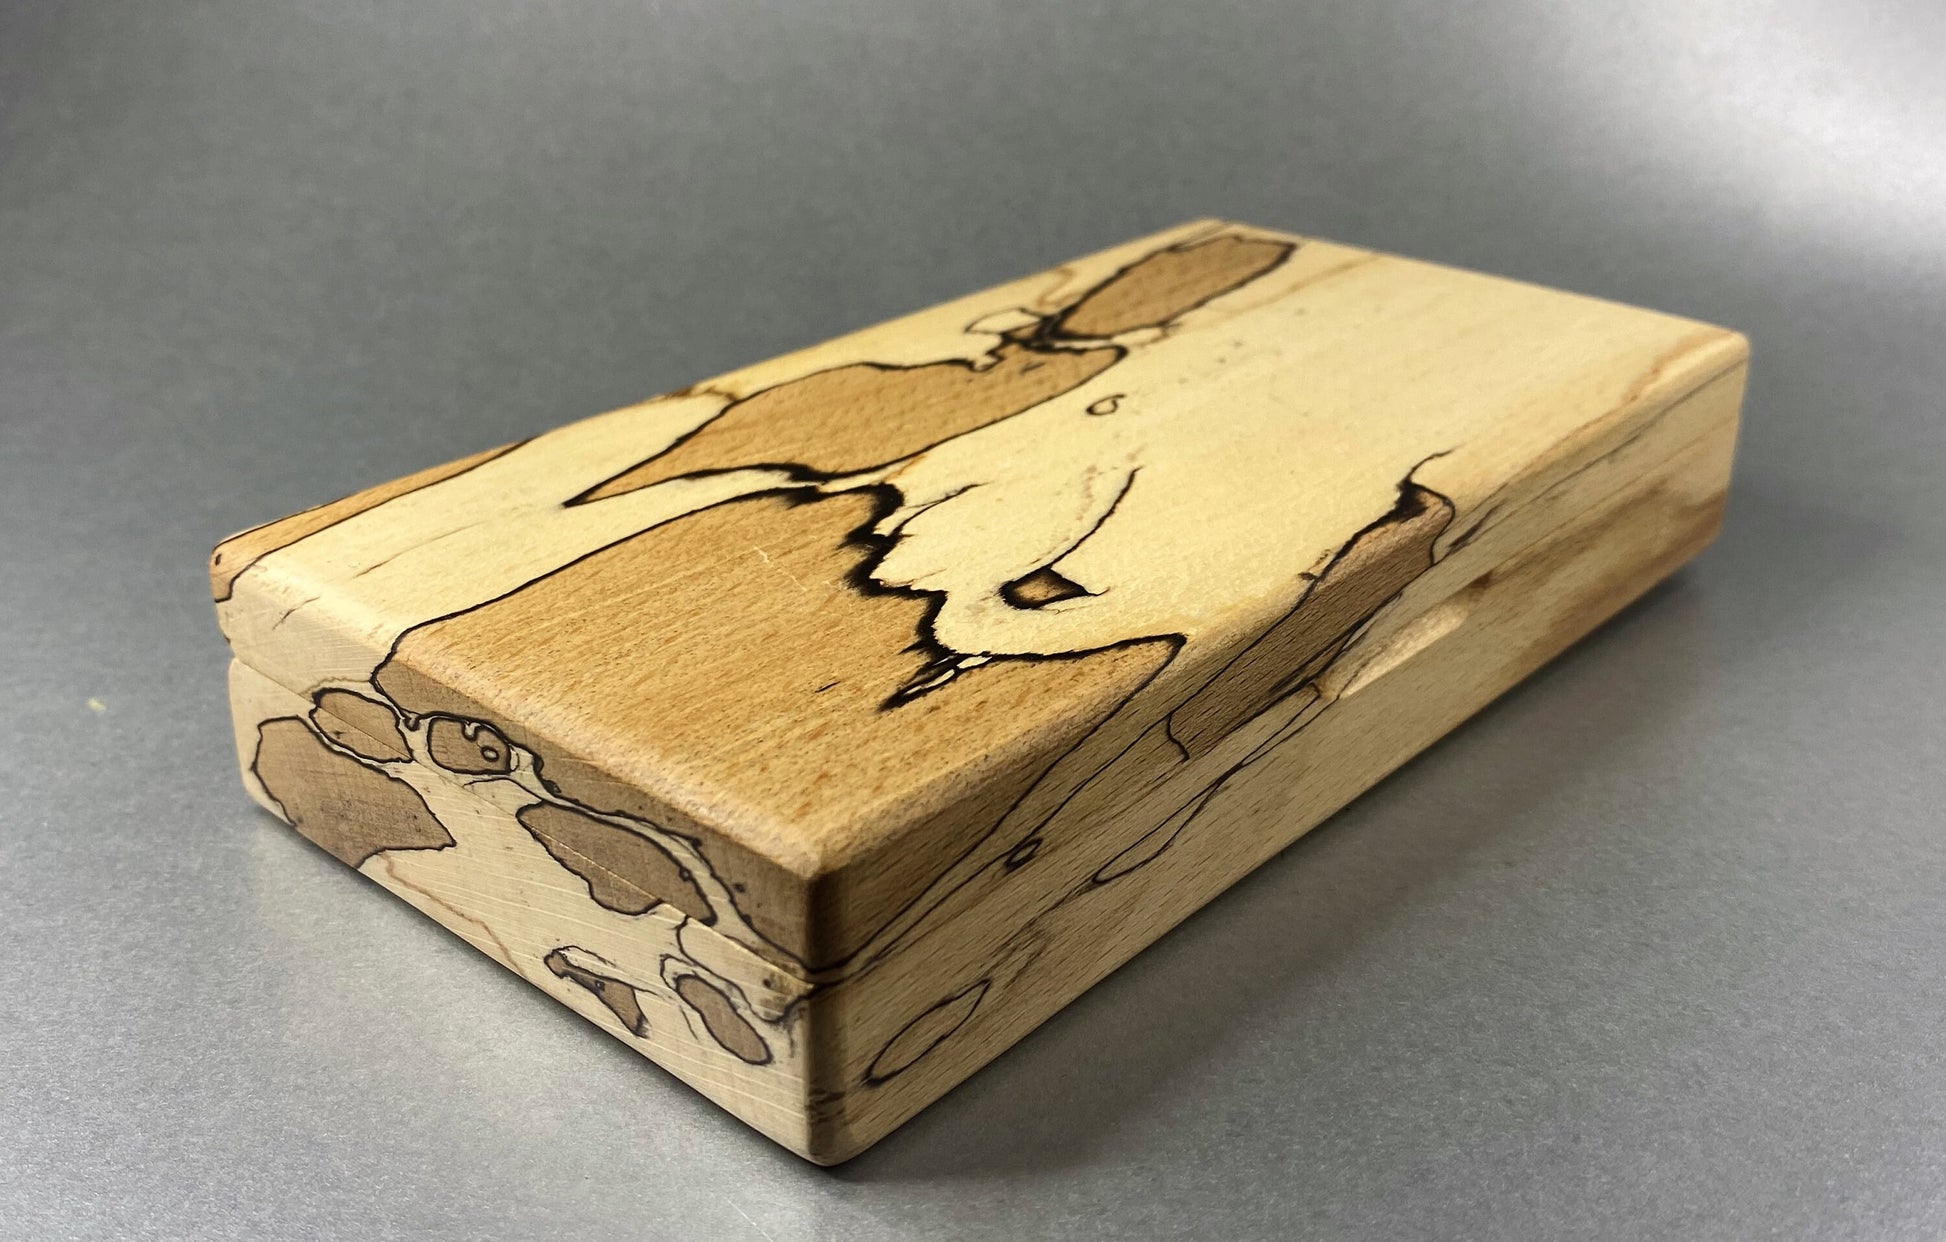 Spalted Beech wood hand crafted presentation box with its lid closed showing the figuring and grain effect on the end grain and on the lid as well.